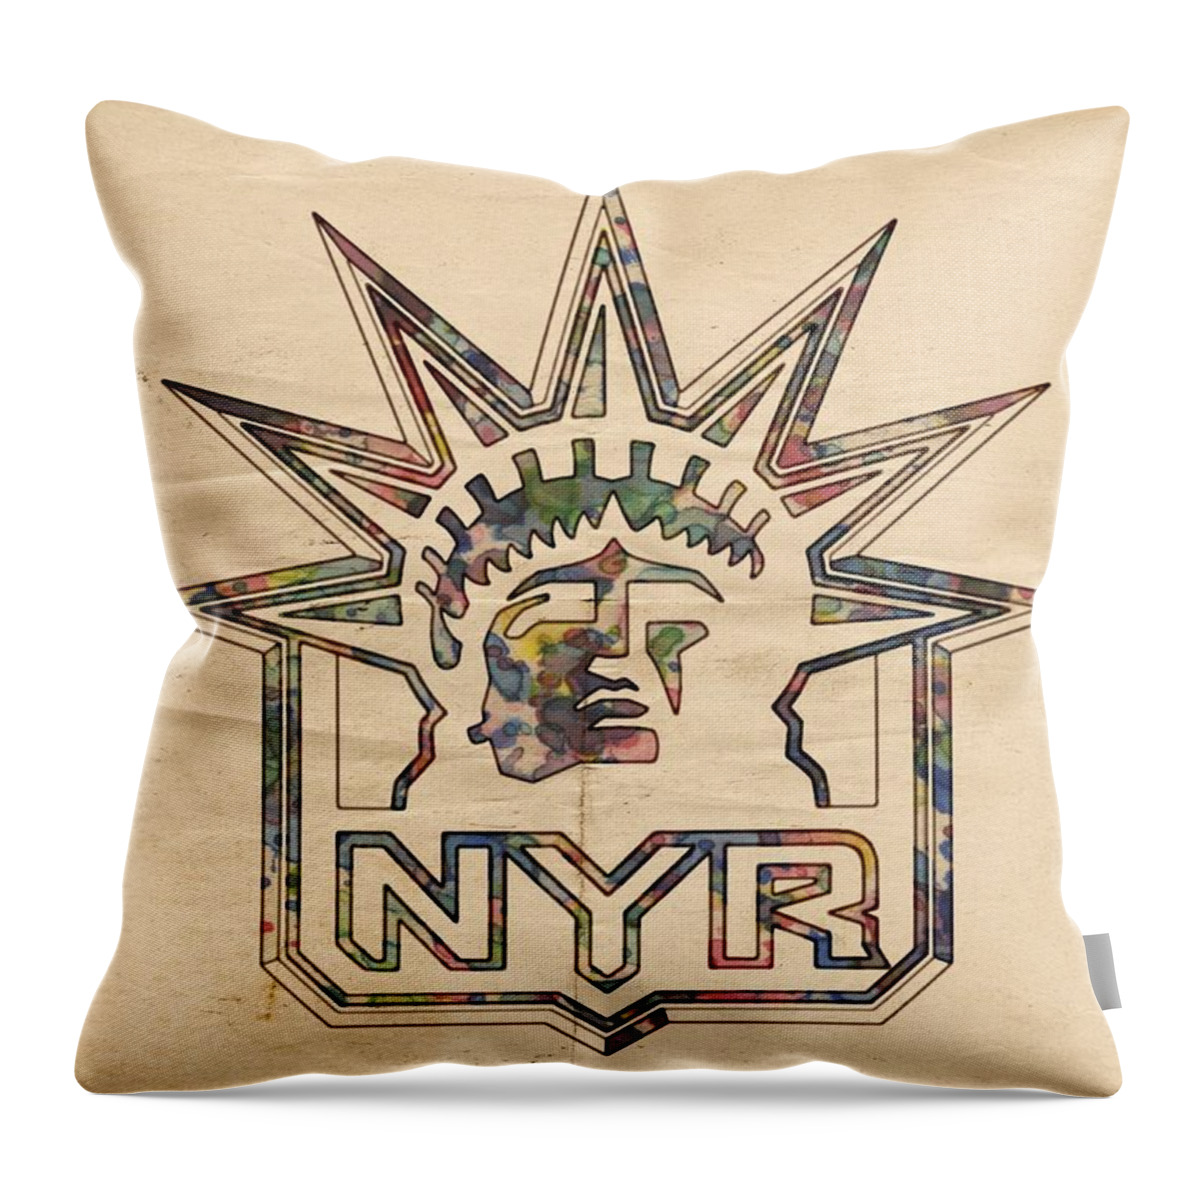 New York Rangers Throw Pillow featuring the painting New York Rangers Vintage Poster by Florian Rodarte